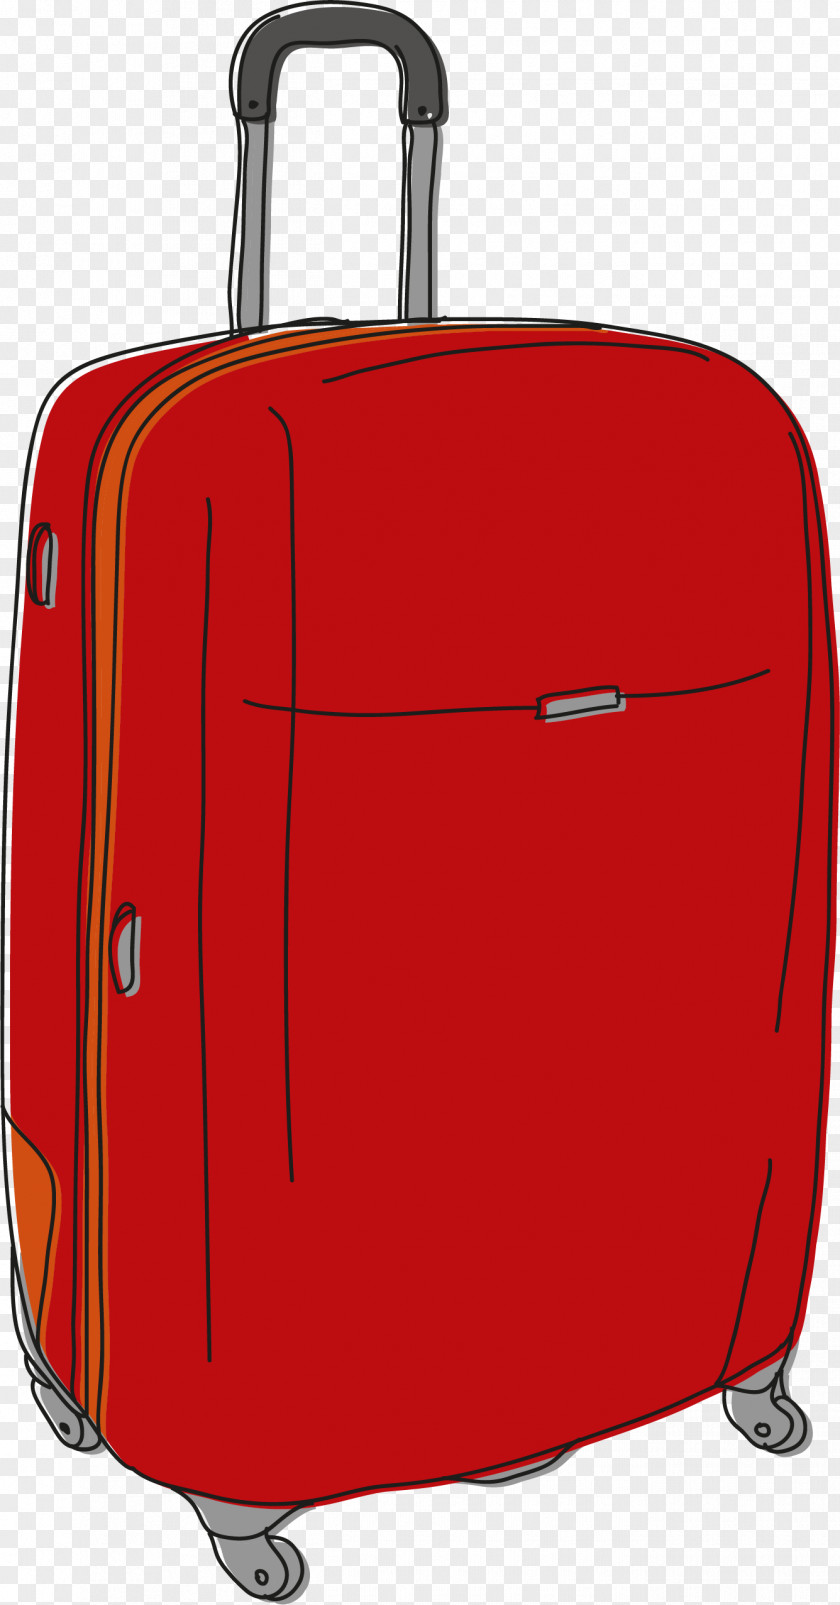 Hand Painted Red Suitcase Luggage Baggage Drawing PNG